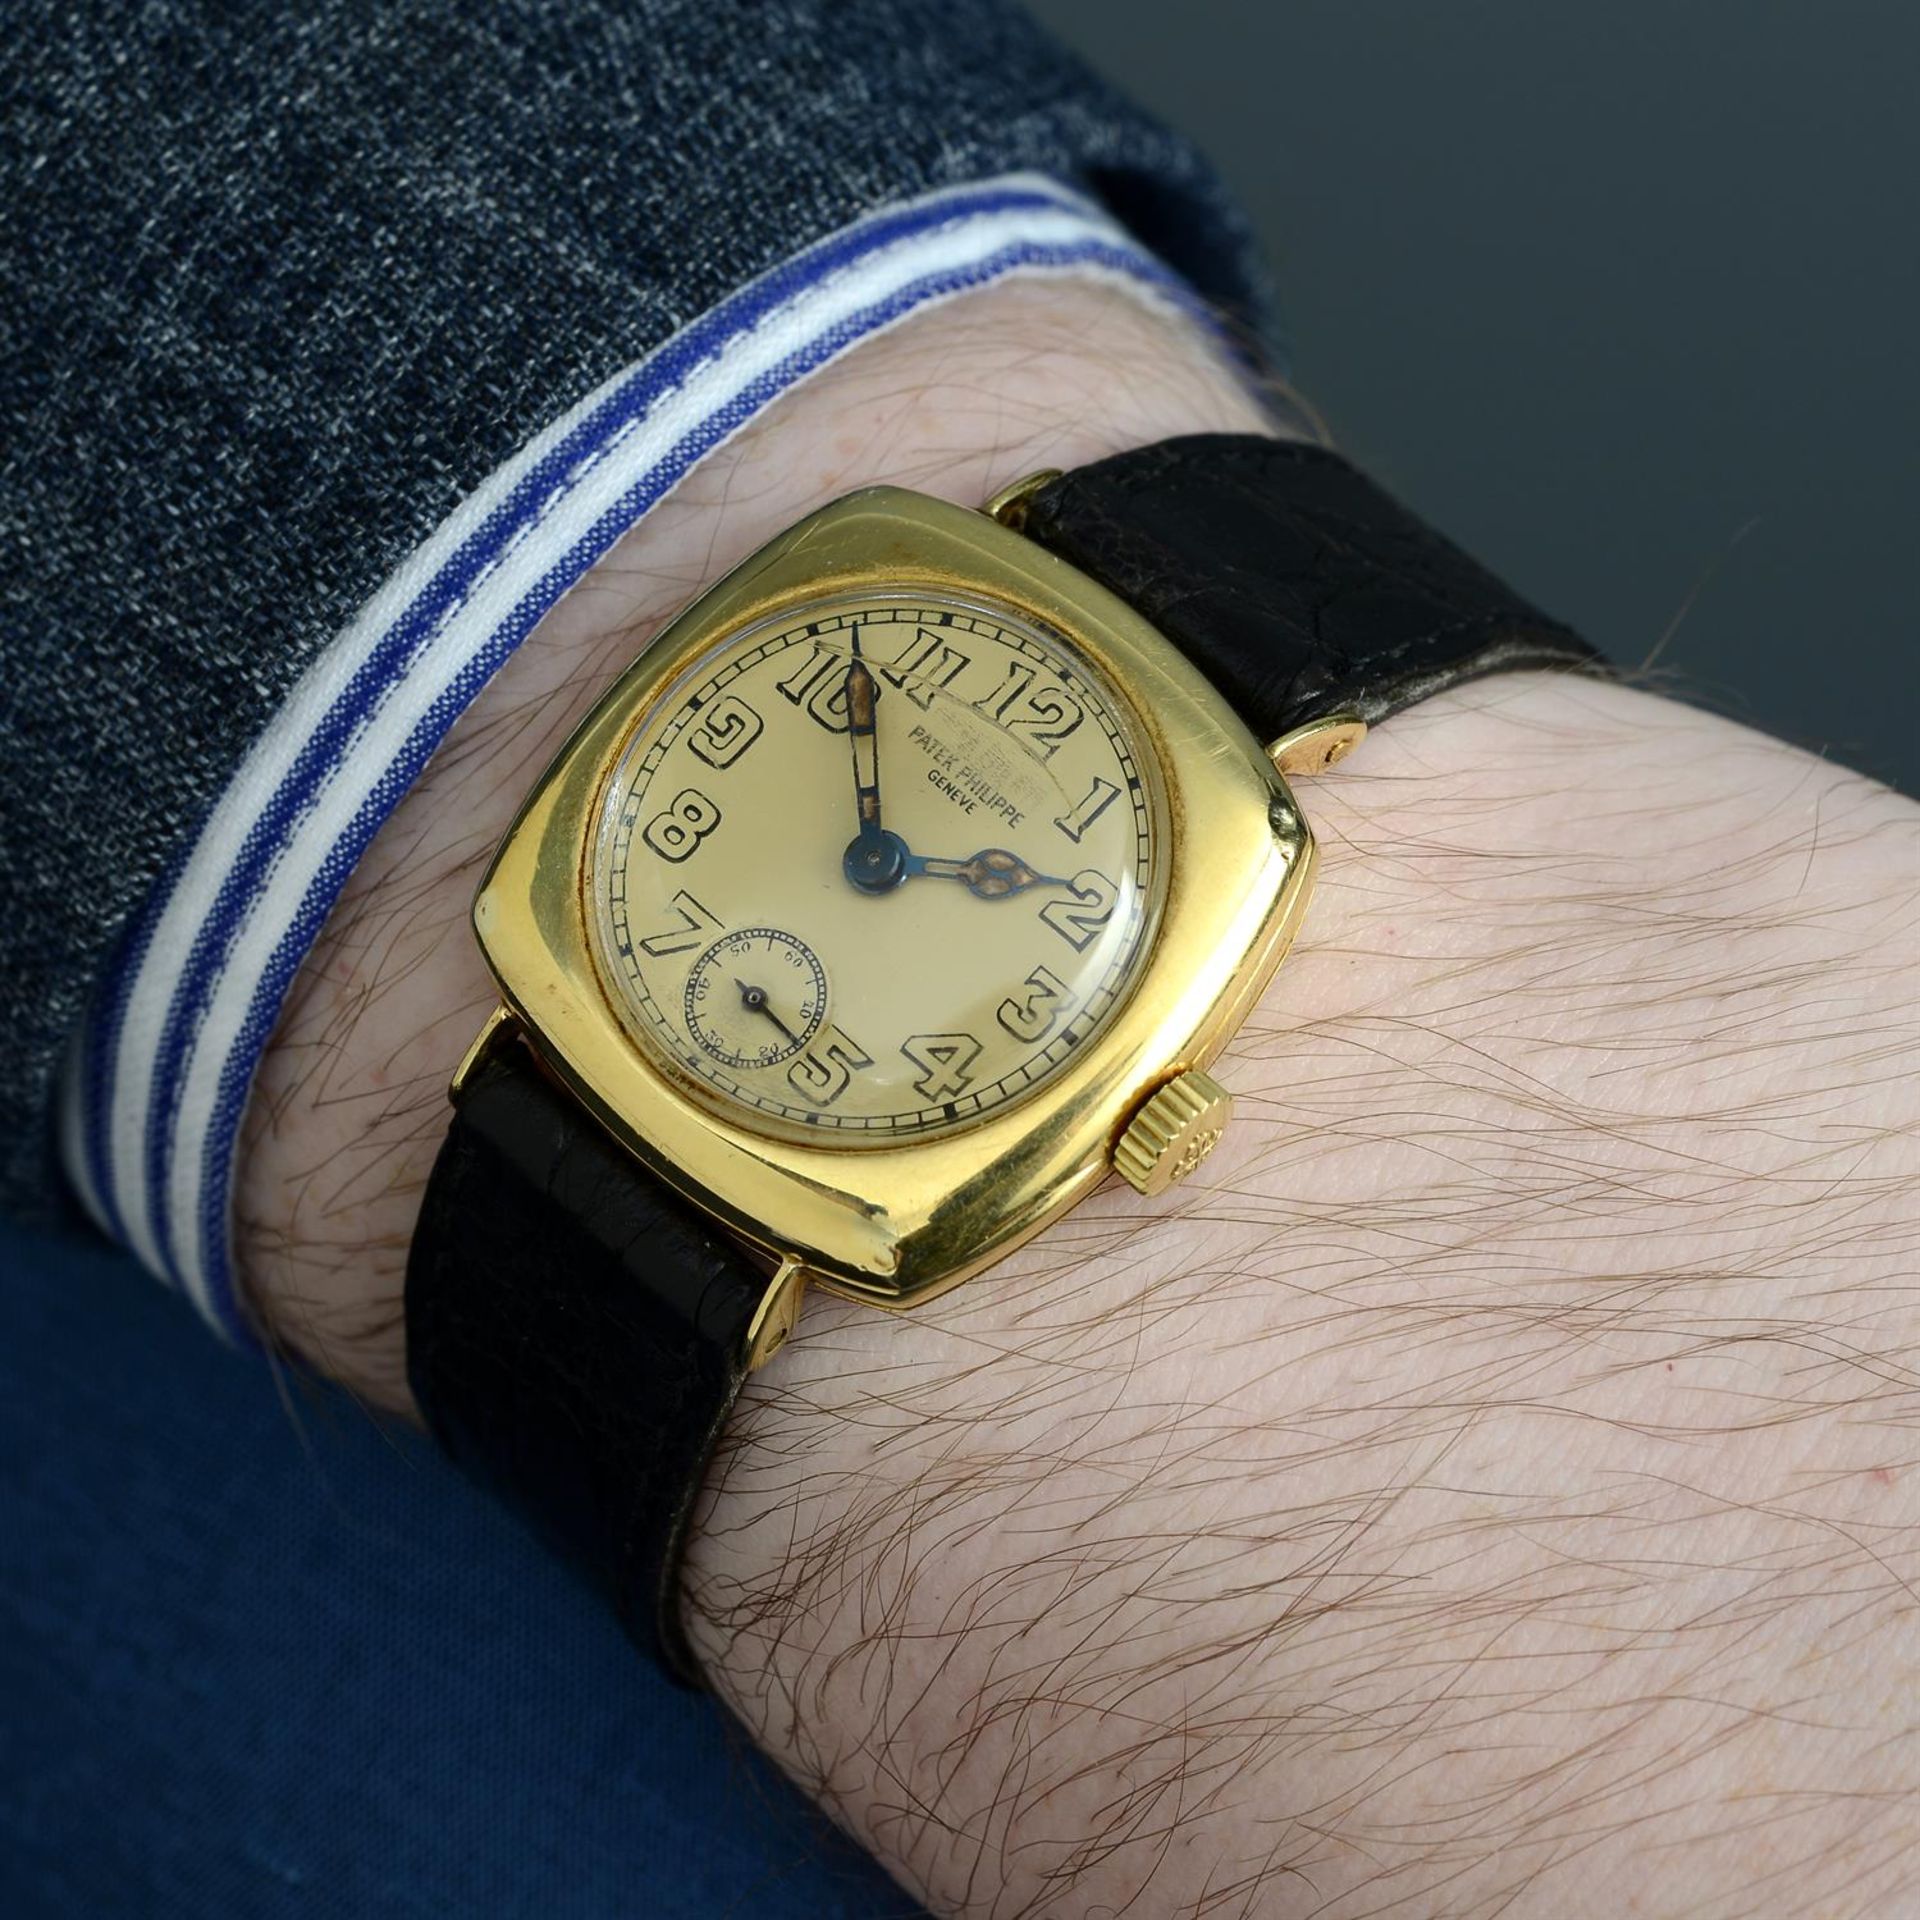 PATEK PHILLIPPE - a yellow metal Officer's wrist watch, 30x30mm. - Image 5 of 5